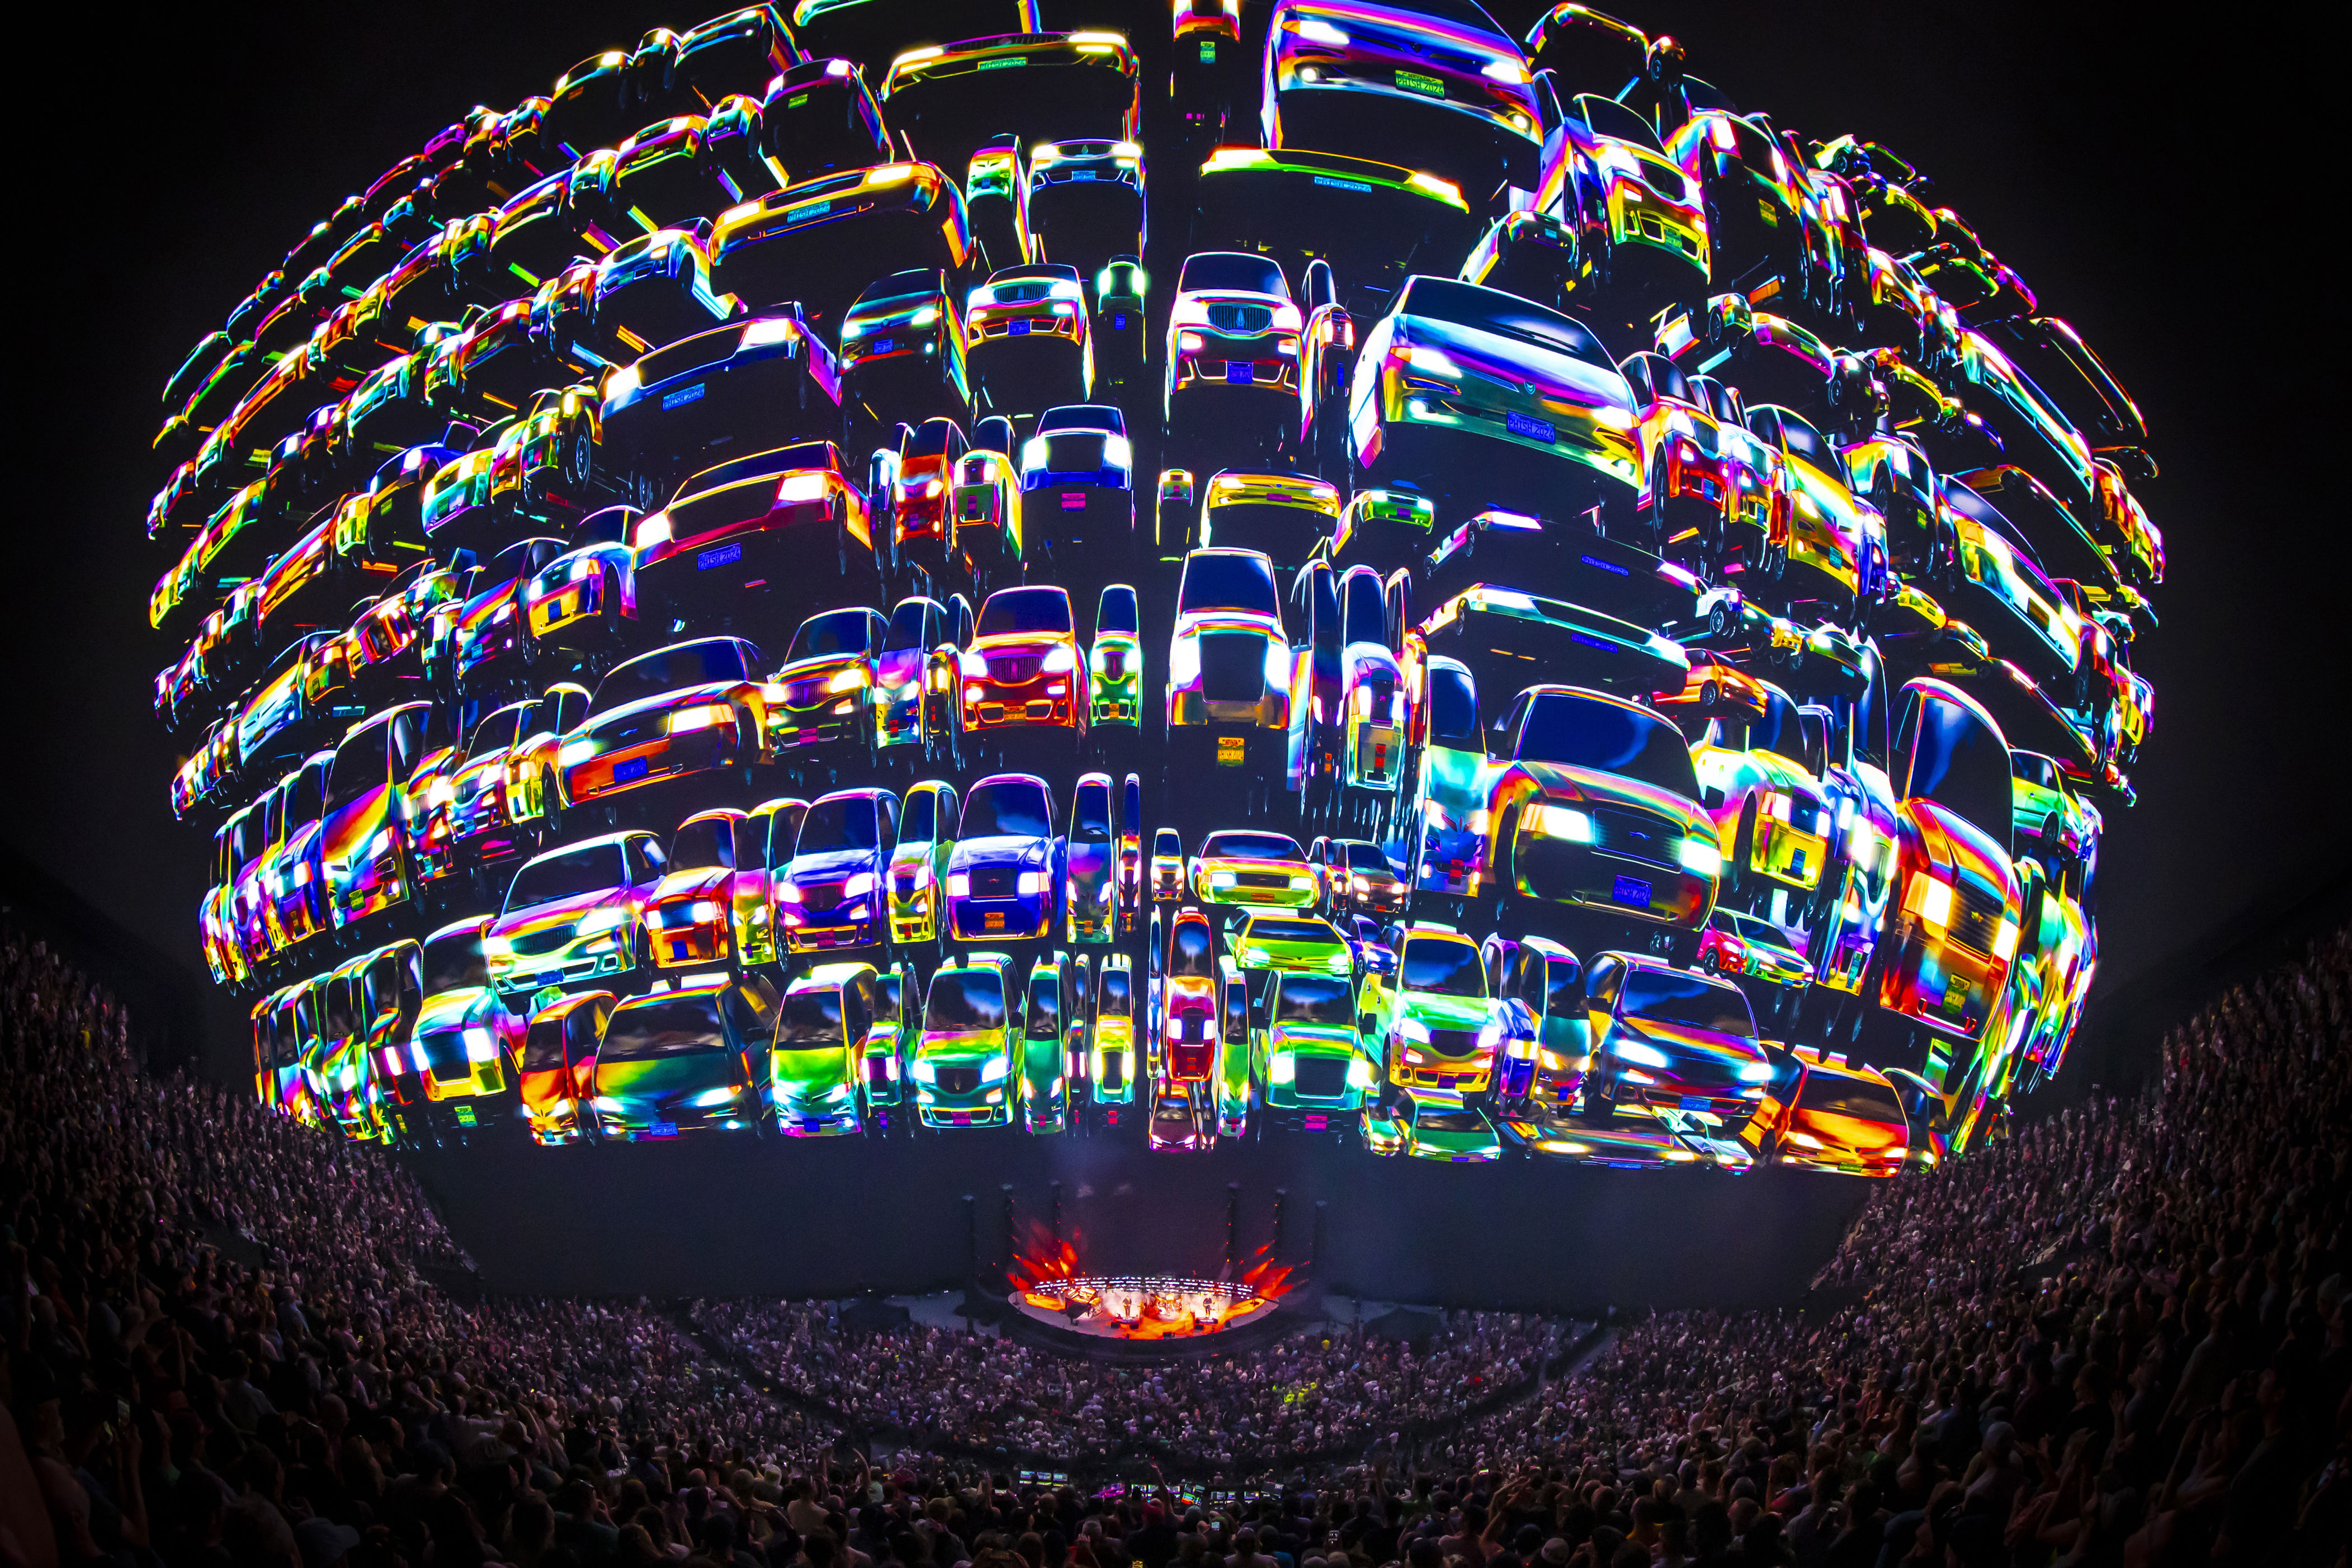 <p>Phish performed during evening one of their four-night run at Sphere in Las Vegas on April 18, 2024.</p><p>Comedy star and "The Prince is Right" host Drew Carey attended one of the band's concerts and left raving. </p><p>"#Phish at the #Sphere," he shared on X alongside a <a href="https://twitter.com/DrewFromTV/status/1782359014292213832">video</a> clip from the psychedelic light show. "I swear I just talked to God. I would give you all my money, stick my d*** in a blender and swear off p**** for the rest of my life in exchange for this. Bro I met God tonight for real. I feel like I just got saved by Jesus no lie."</p><p>MORE: <a href="https://www.wonderwall.com/celebrity/photos/iconic-vegas-hotel-closes-after-67-years-elizabeth-taylor-wayne-newton-liberace-joe-biden-and-more-who-visited-849715.gallery">Las Vegas landmark the Tropicana closes to make way for baseball stadium: See stars at the icon hotel over the decades</a></p>